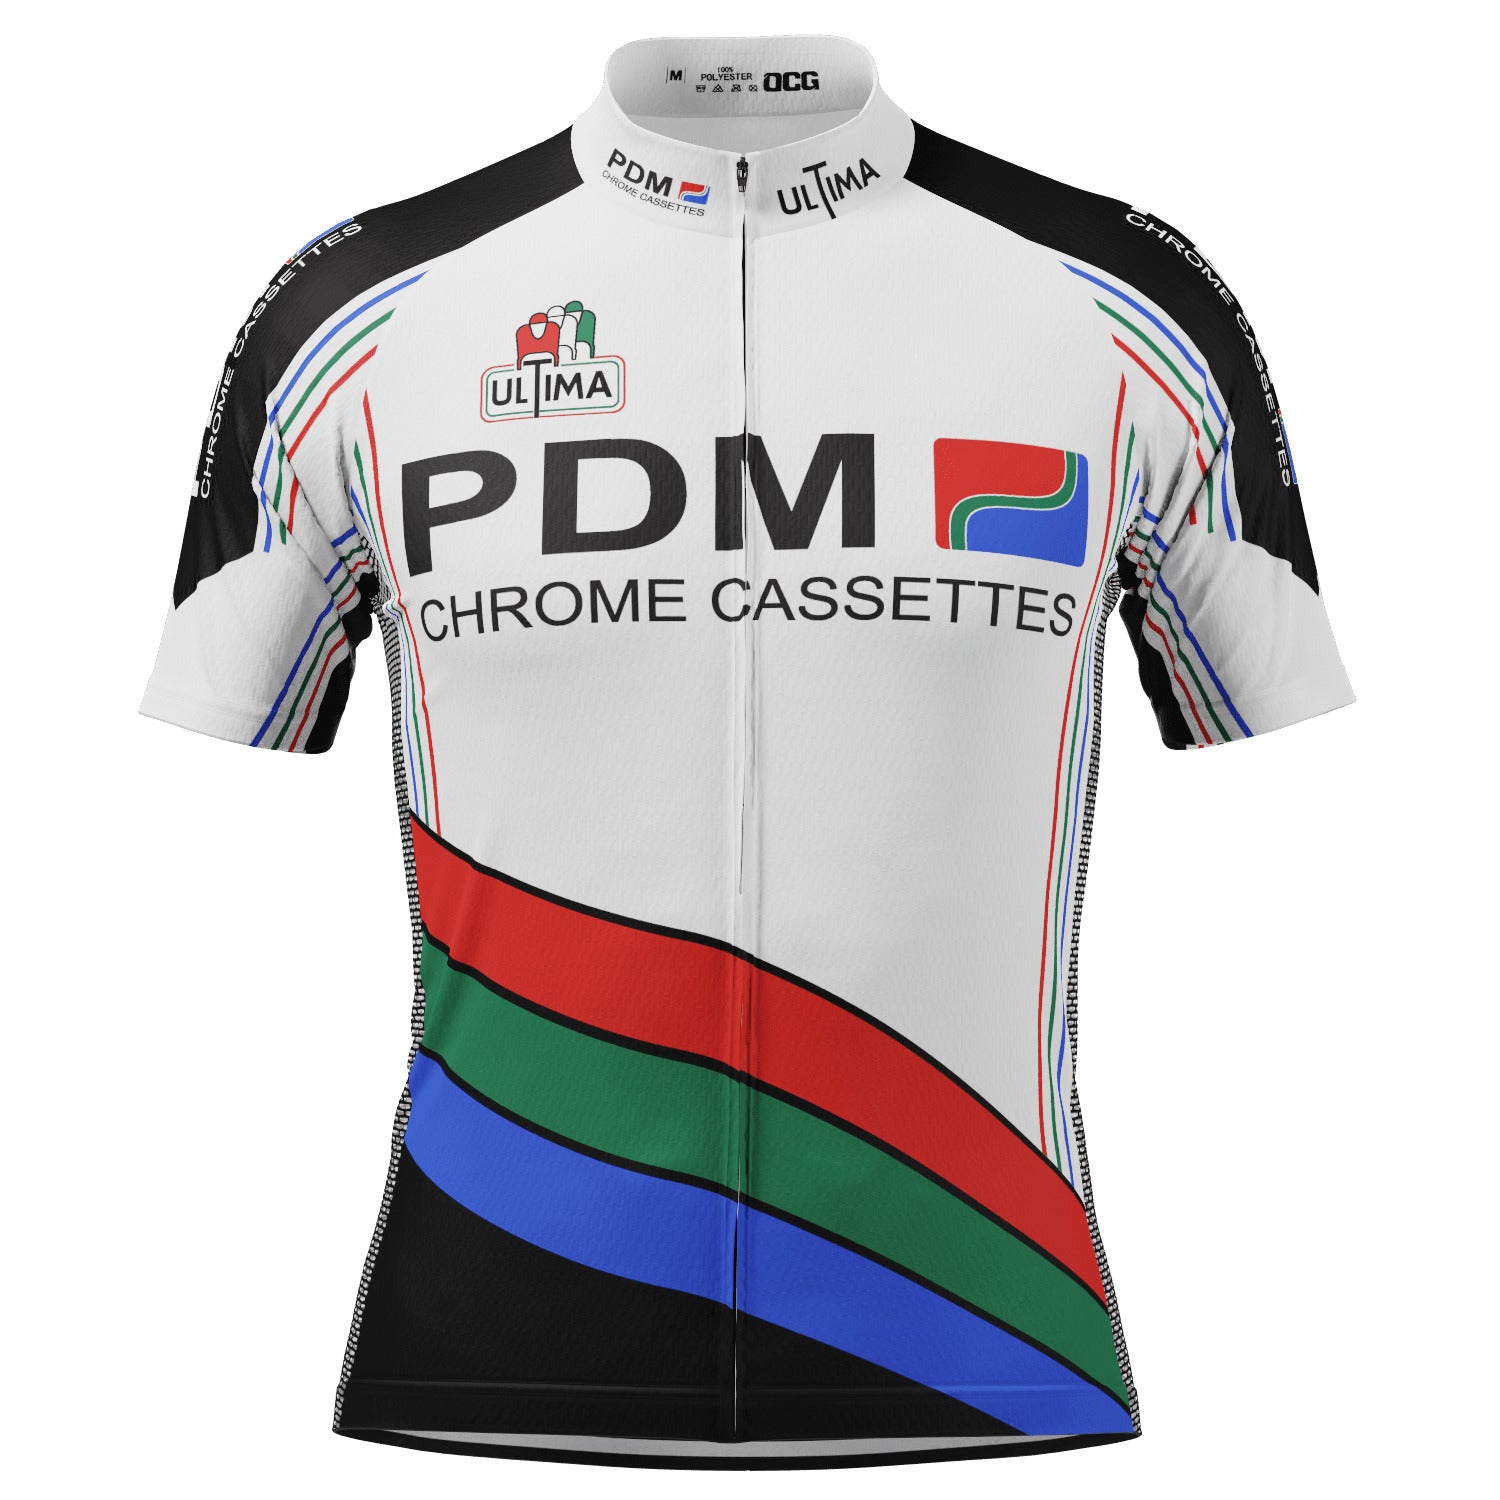 PDM Cassettes Ultima Retro Short Sleeve Cycling Jersey